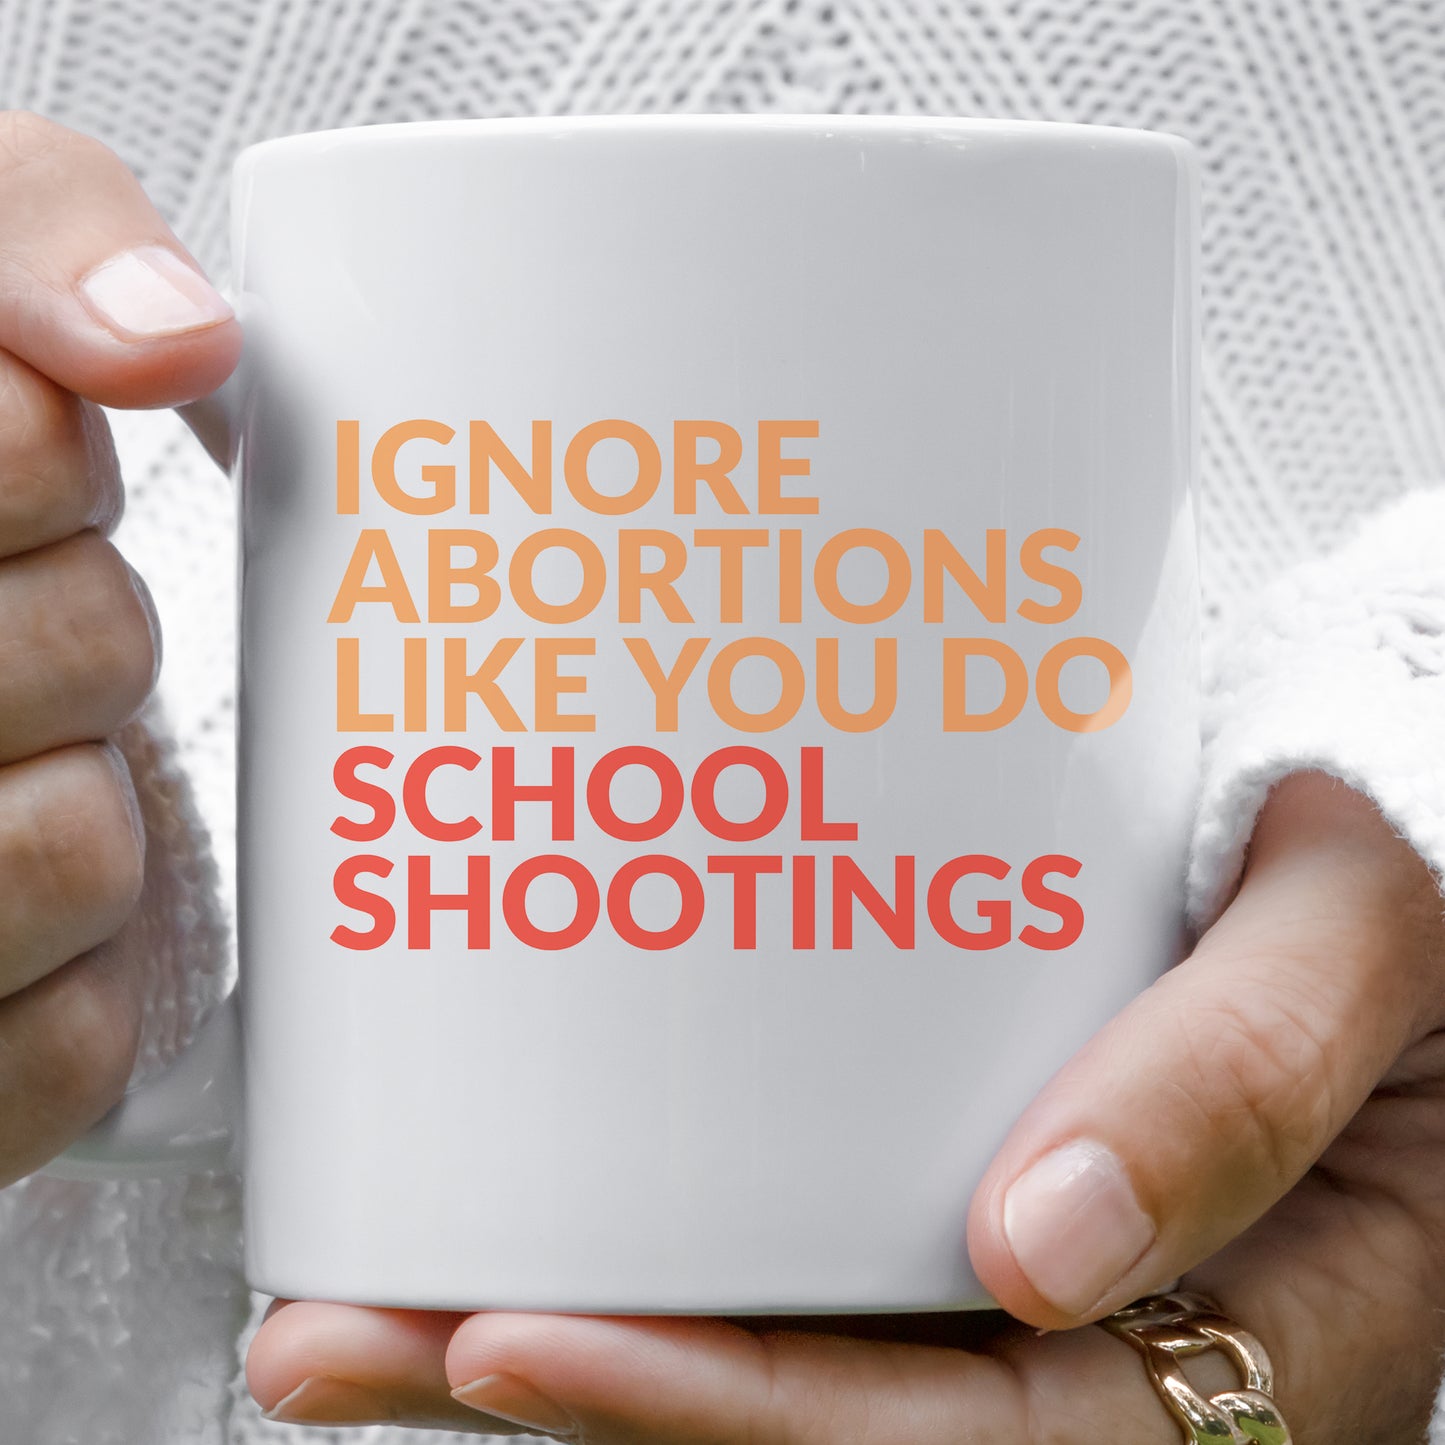 A woman holding a white 11oz ceramic mug that says “Ignore abortions like you do school shootings” in all caps in an orange font. The words “school shootings” are in red. The handle is on the left side in this image.